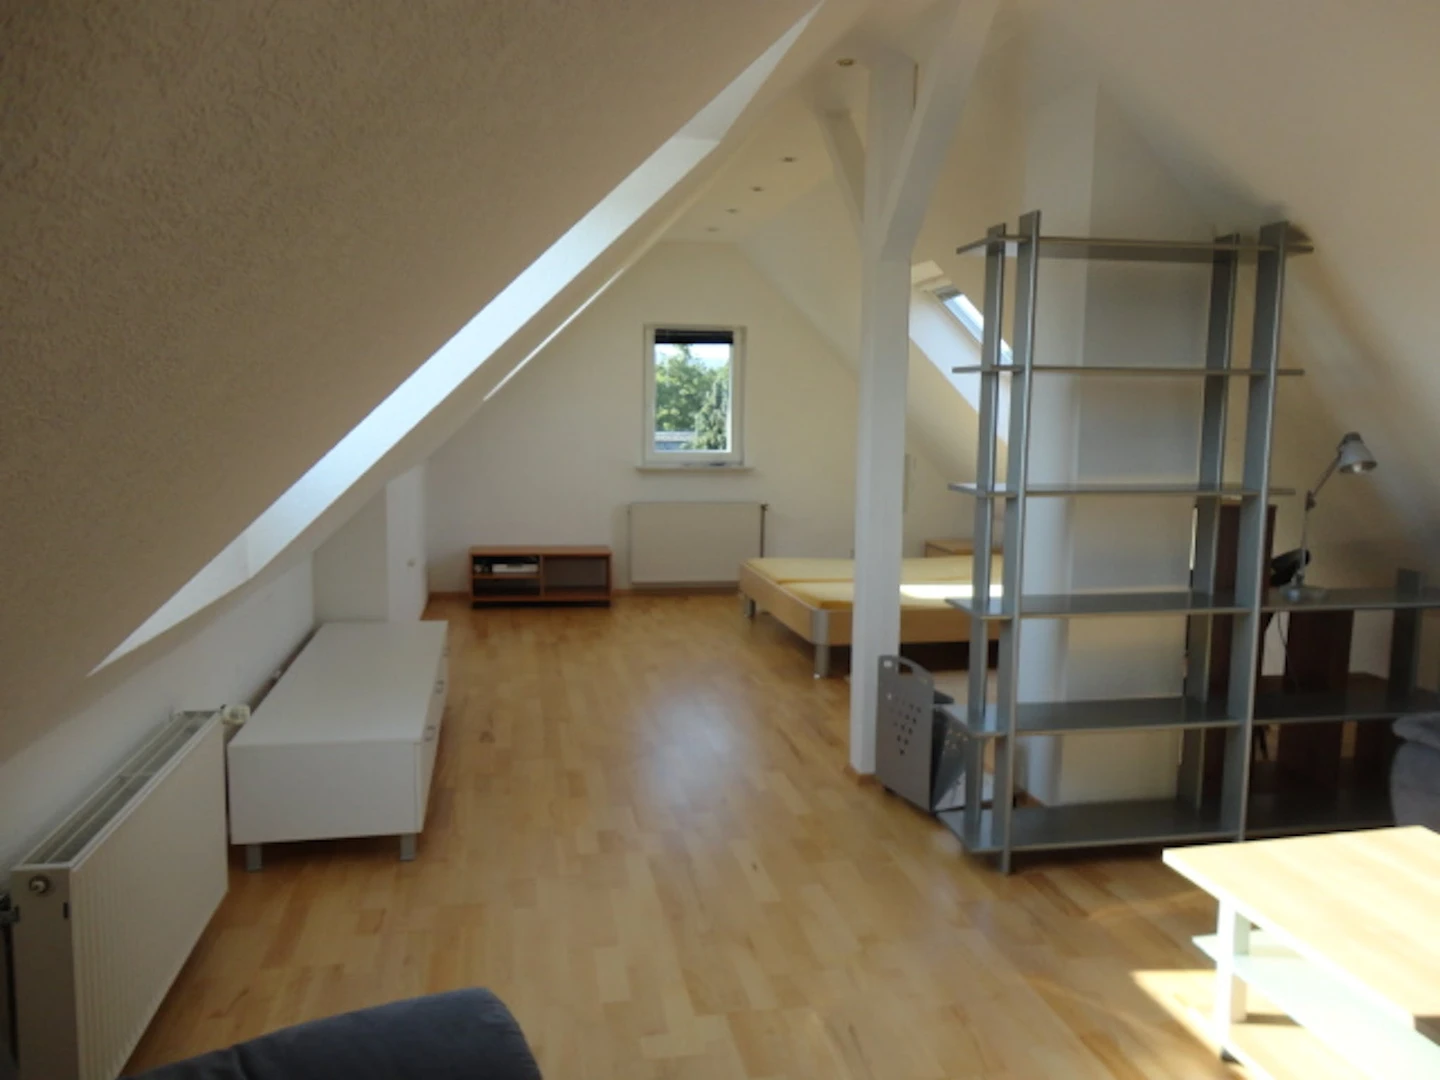 Accommodation in the centre of Eschborn